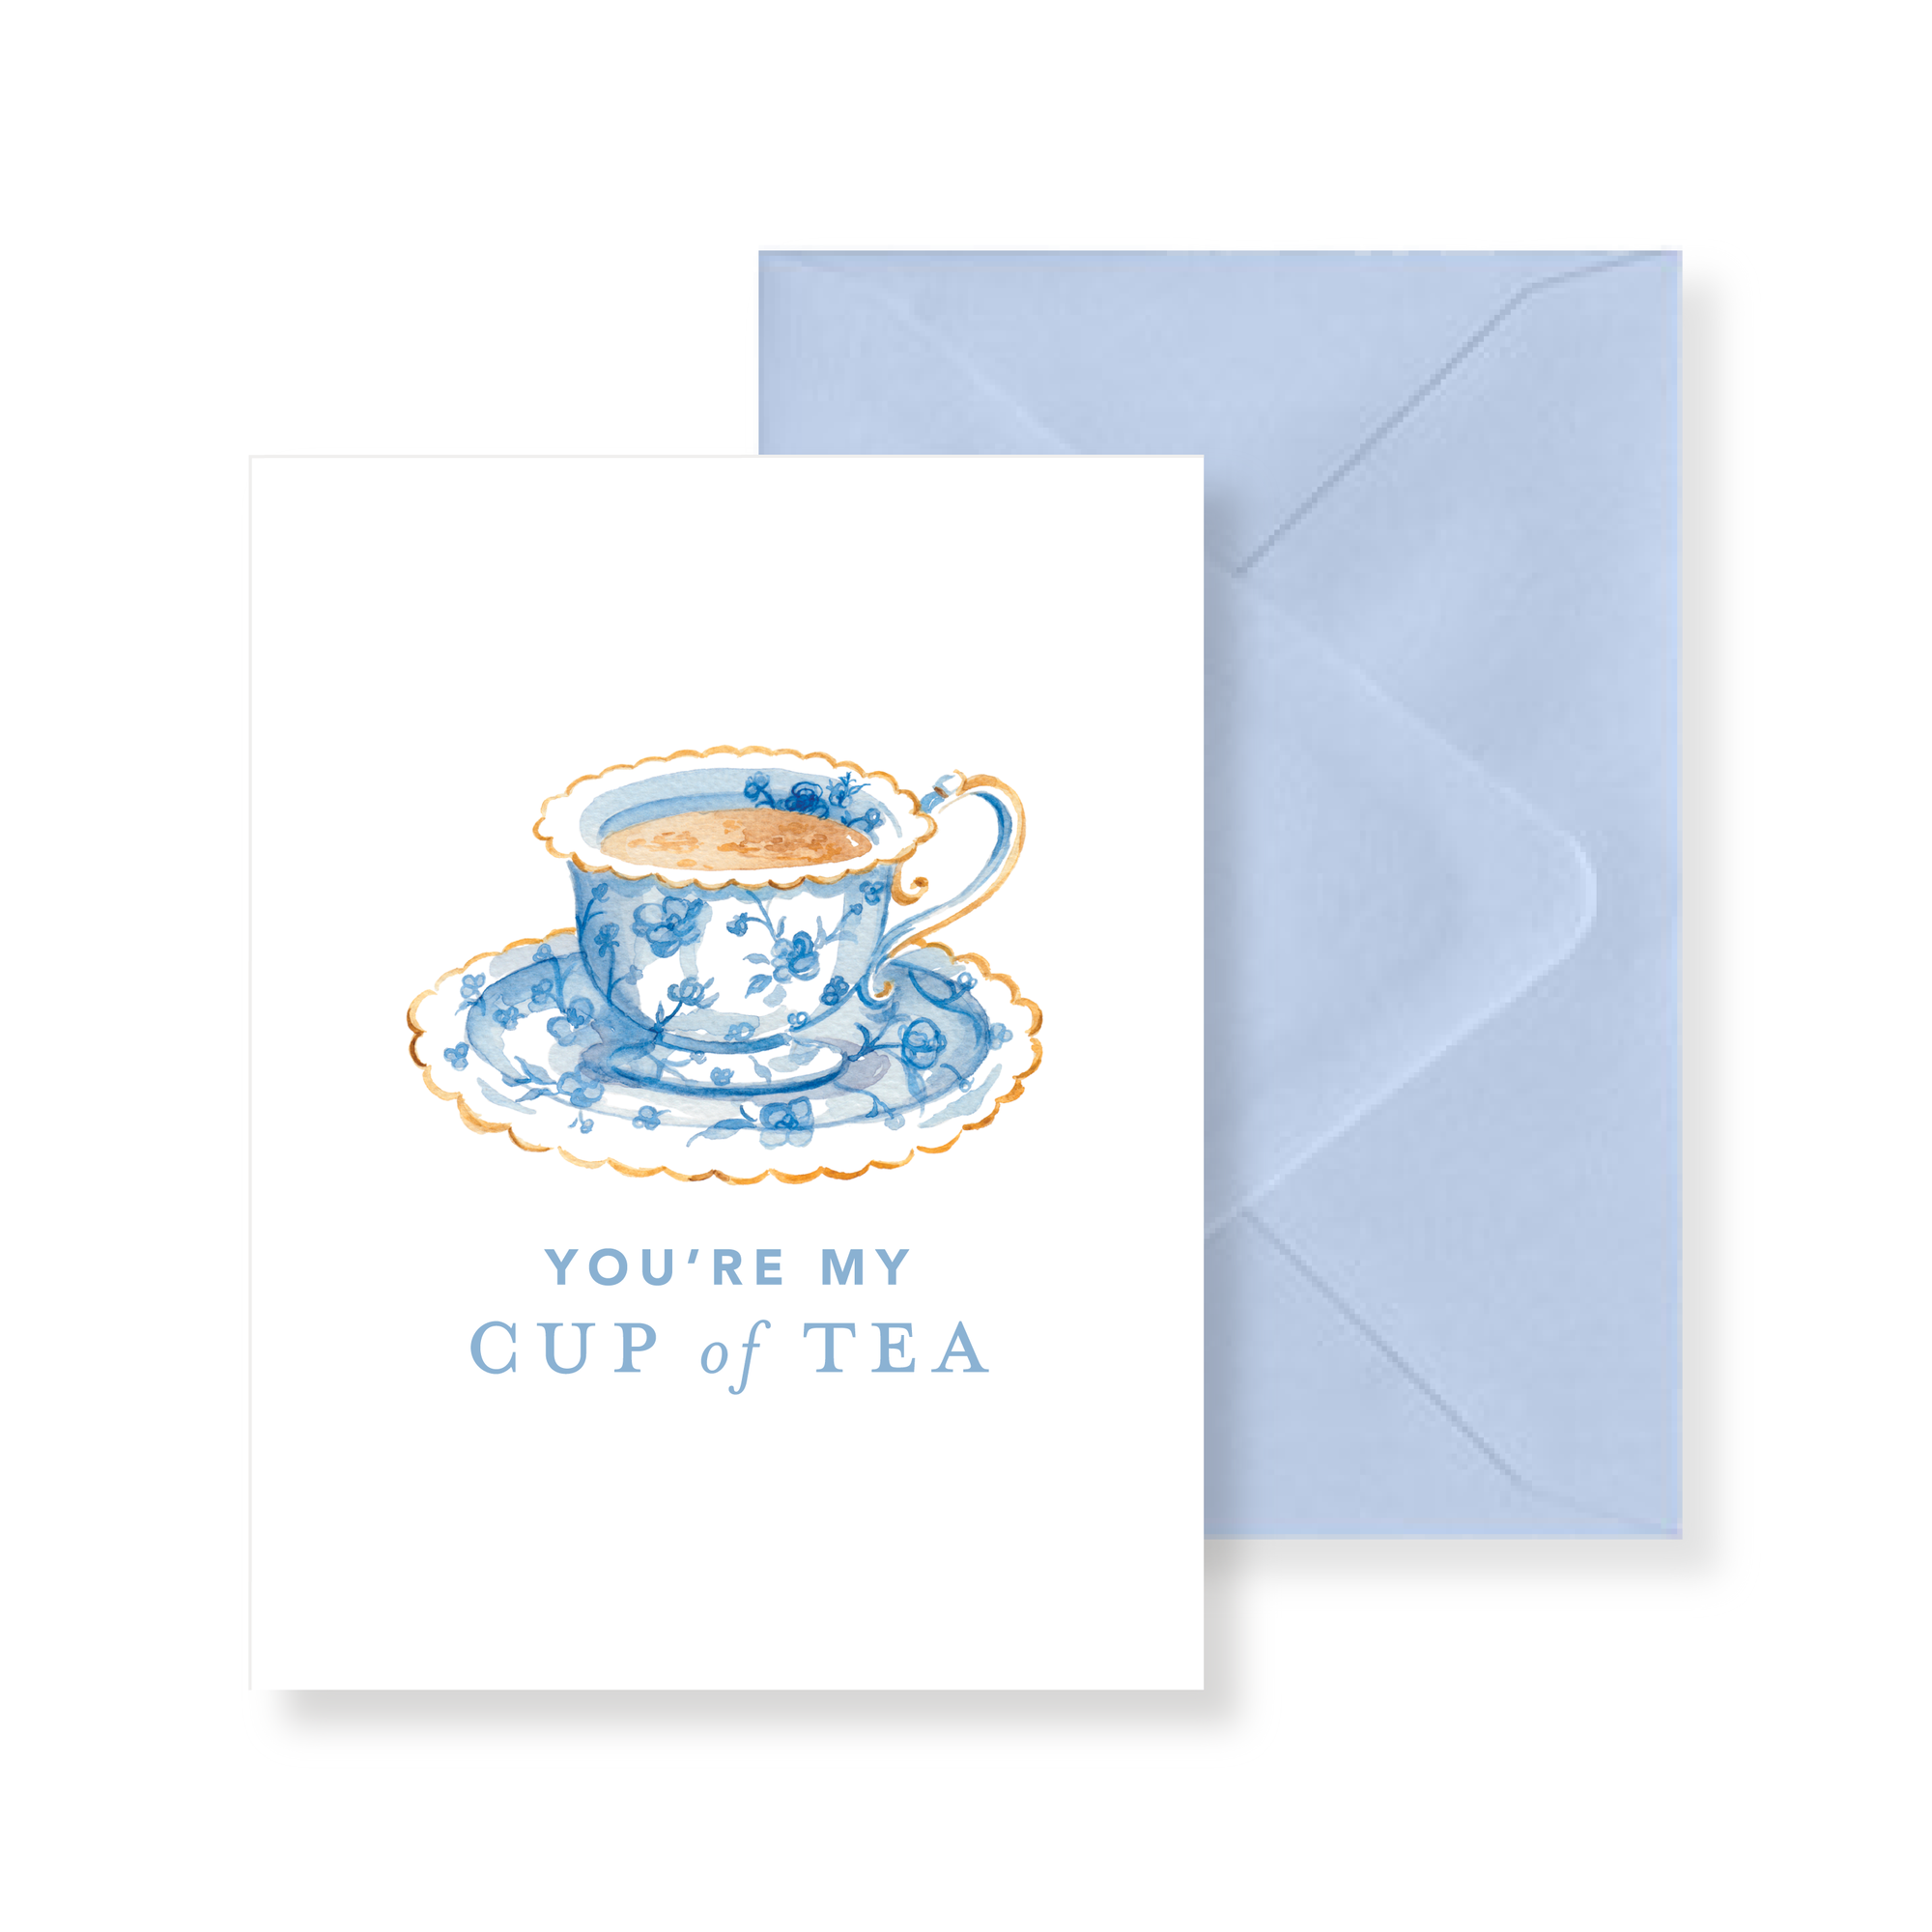 You're My Cup of Tea Watercolor Greeting Card